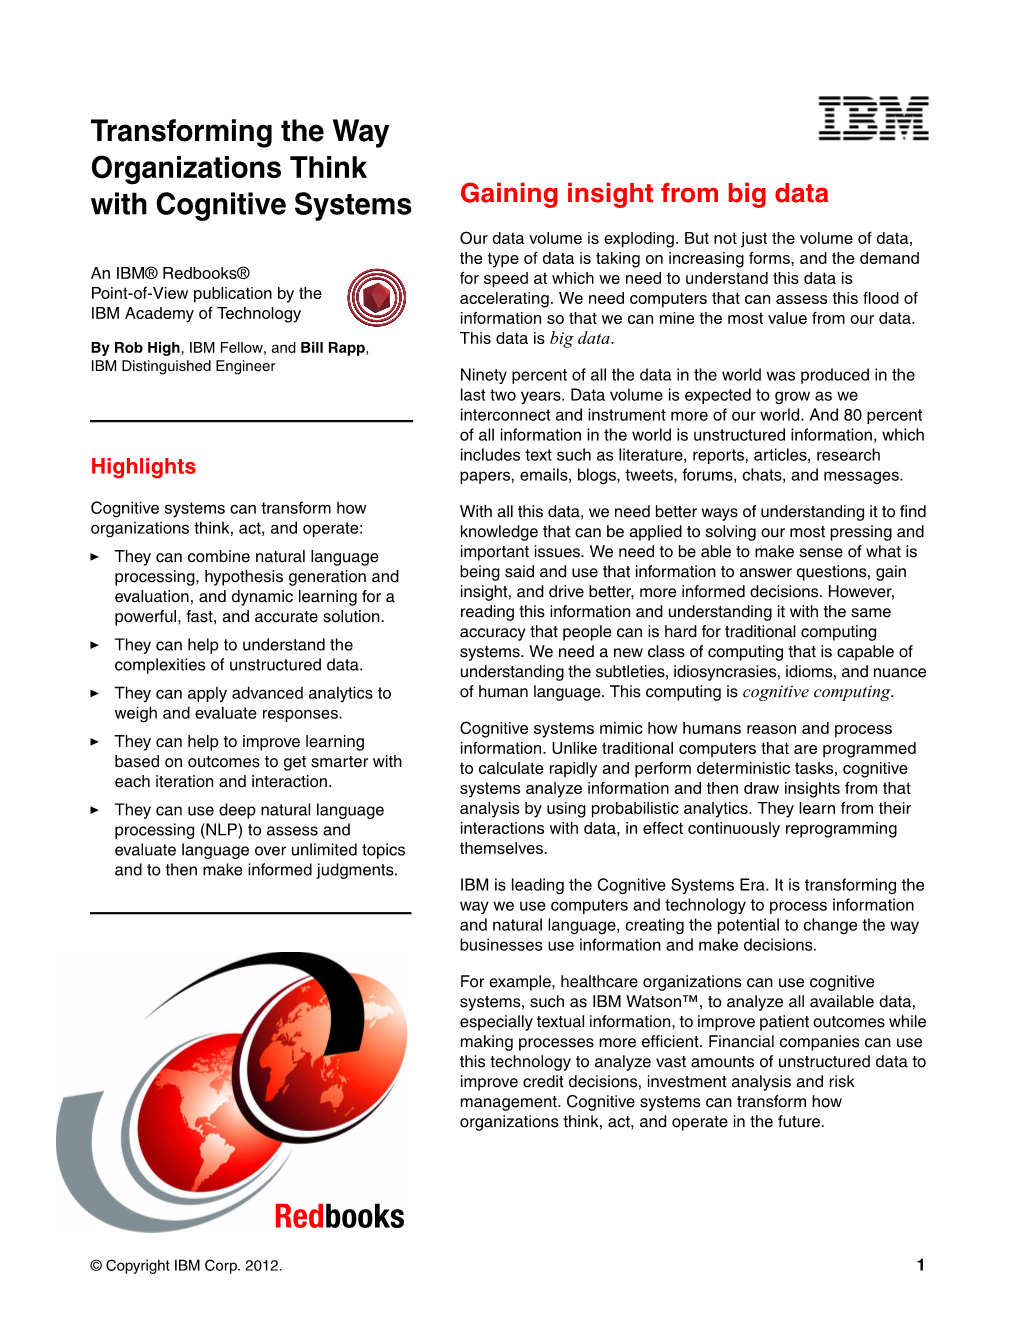 Transforming the Way Organizations Think with Cognitive Systems Gaining Insight from Big Data Our Data Volume Is Exploding